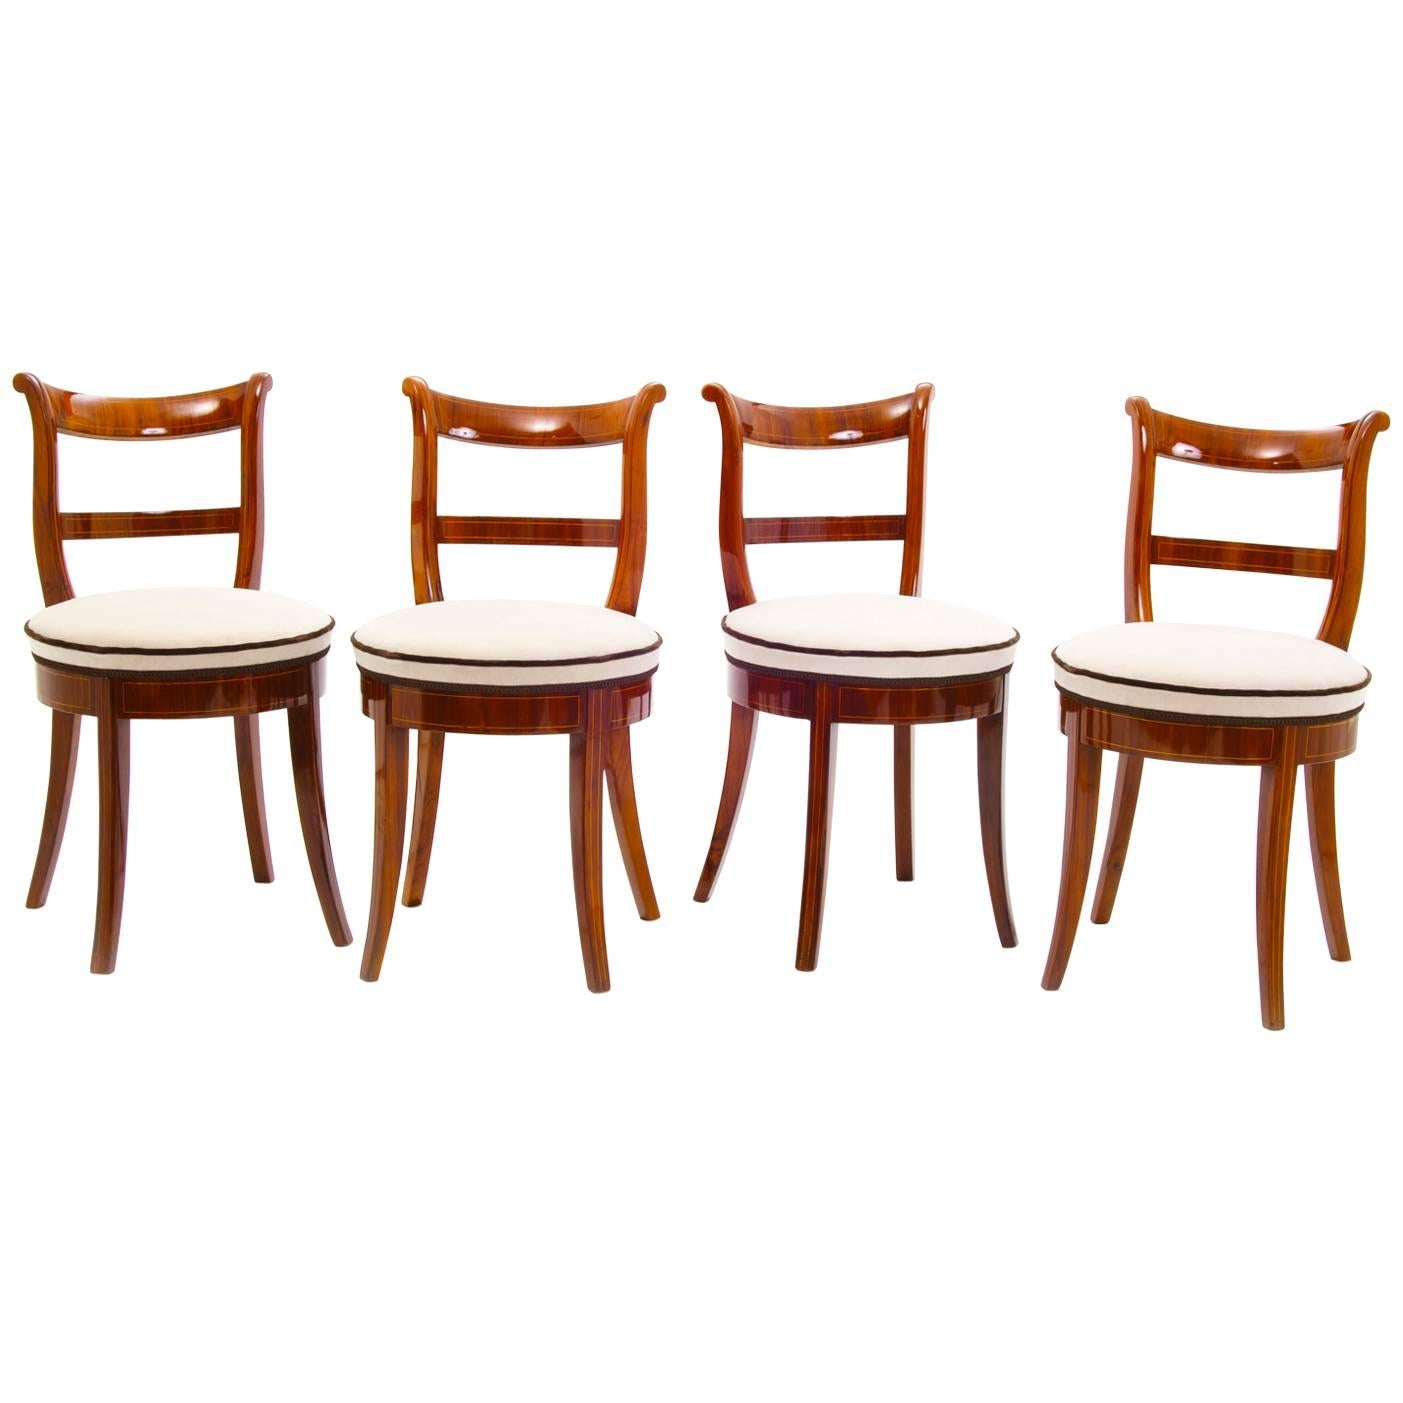 Lady Chairs, Central German Probably, Maple and Plum, Thuringia, 1830-1840 For Sale